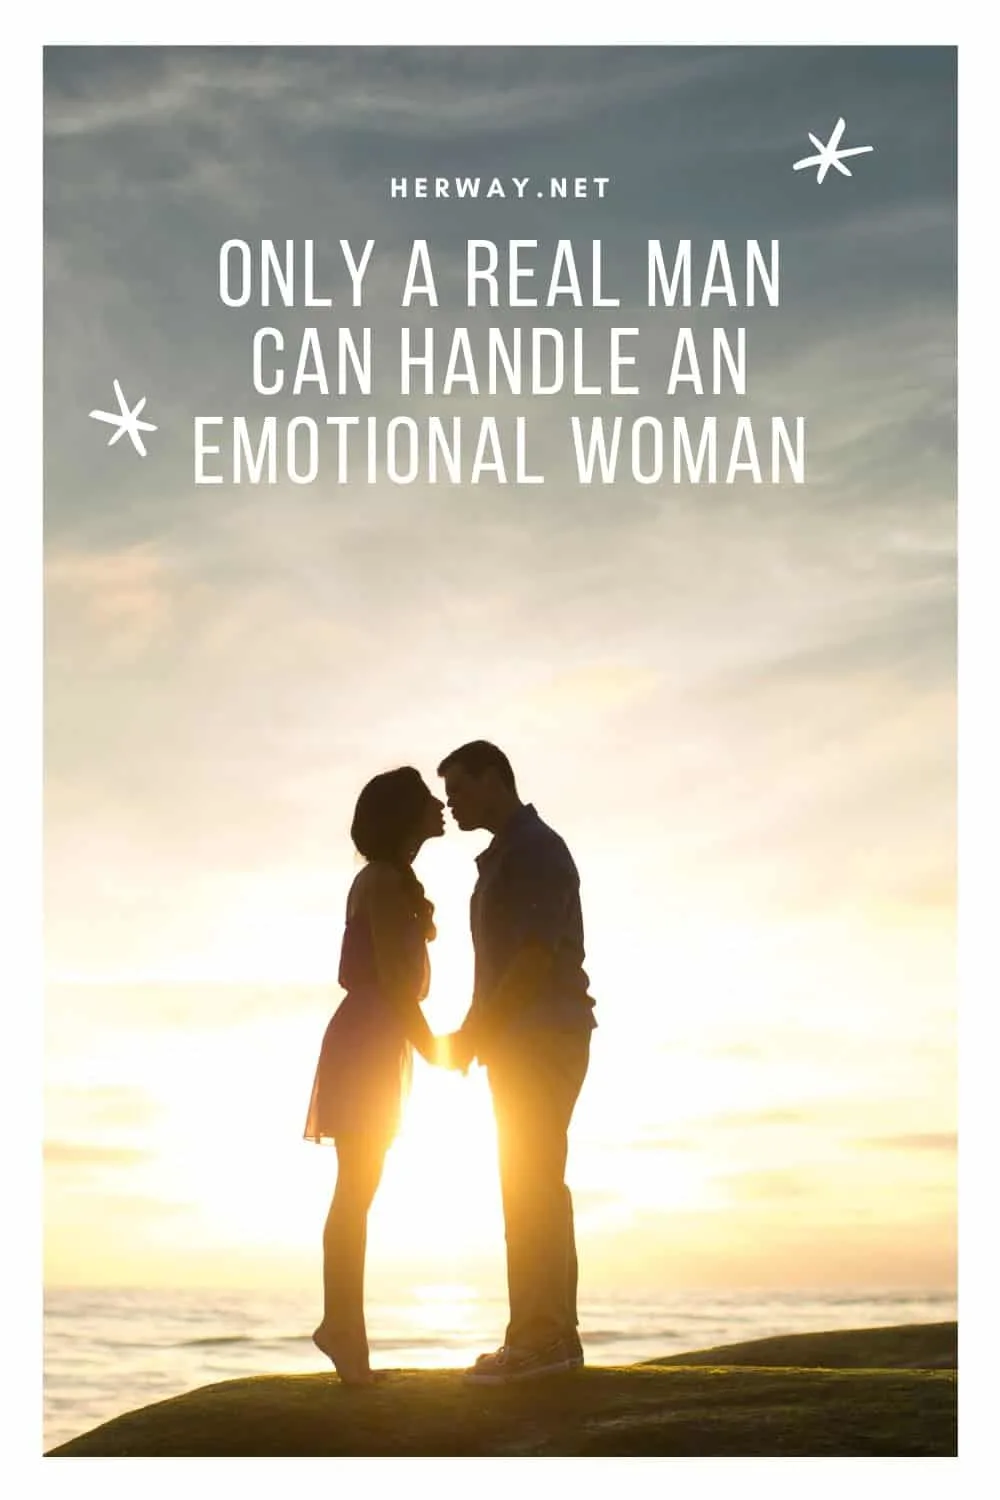 ONLY A REAL MAN CAN HANDLE AN EMOTIONAL WOMAN